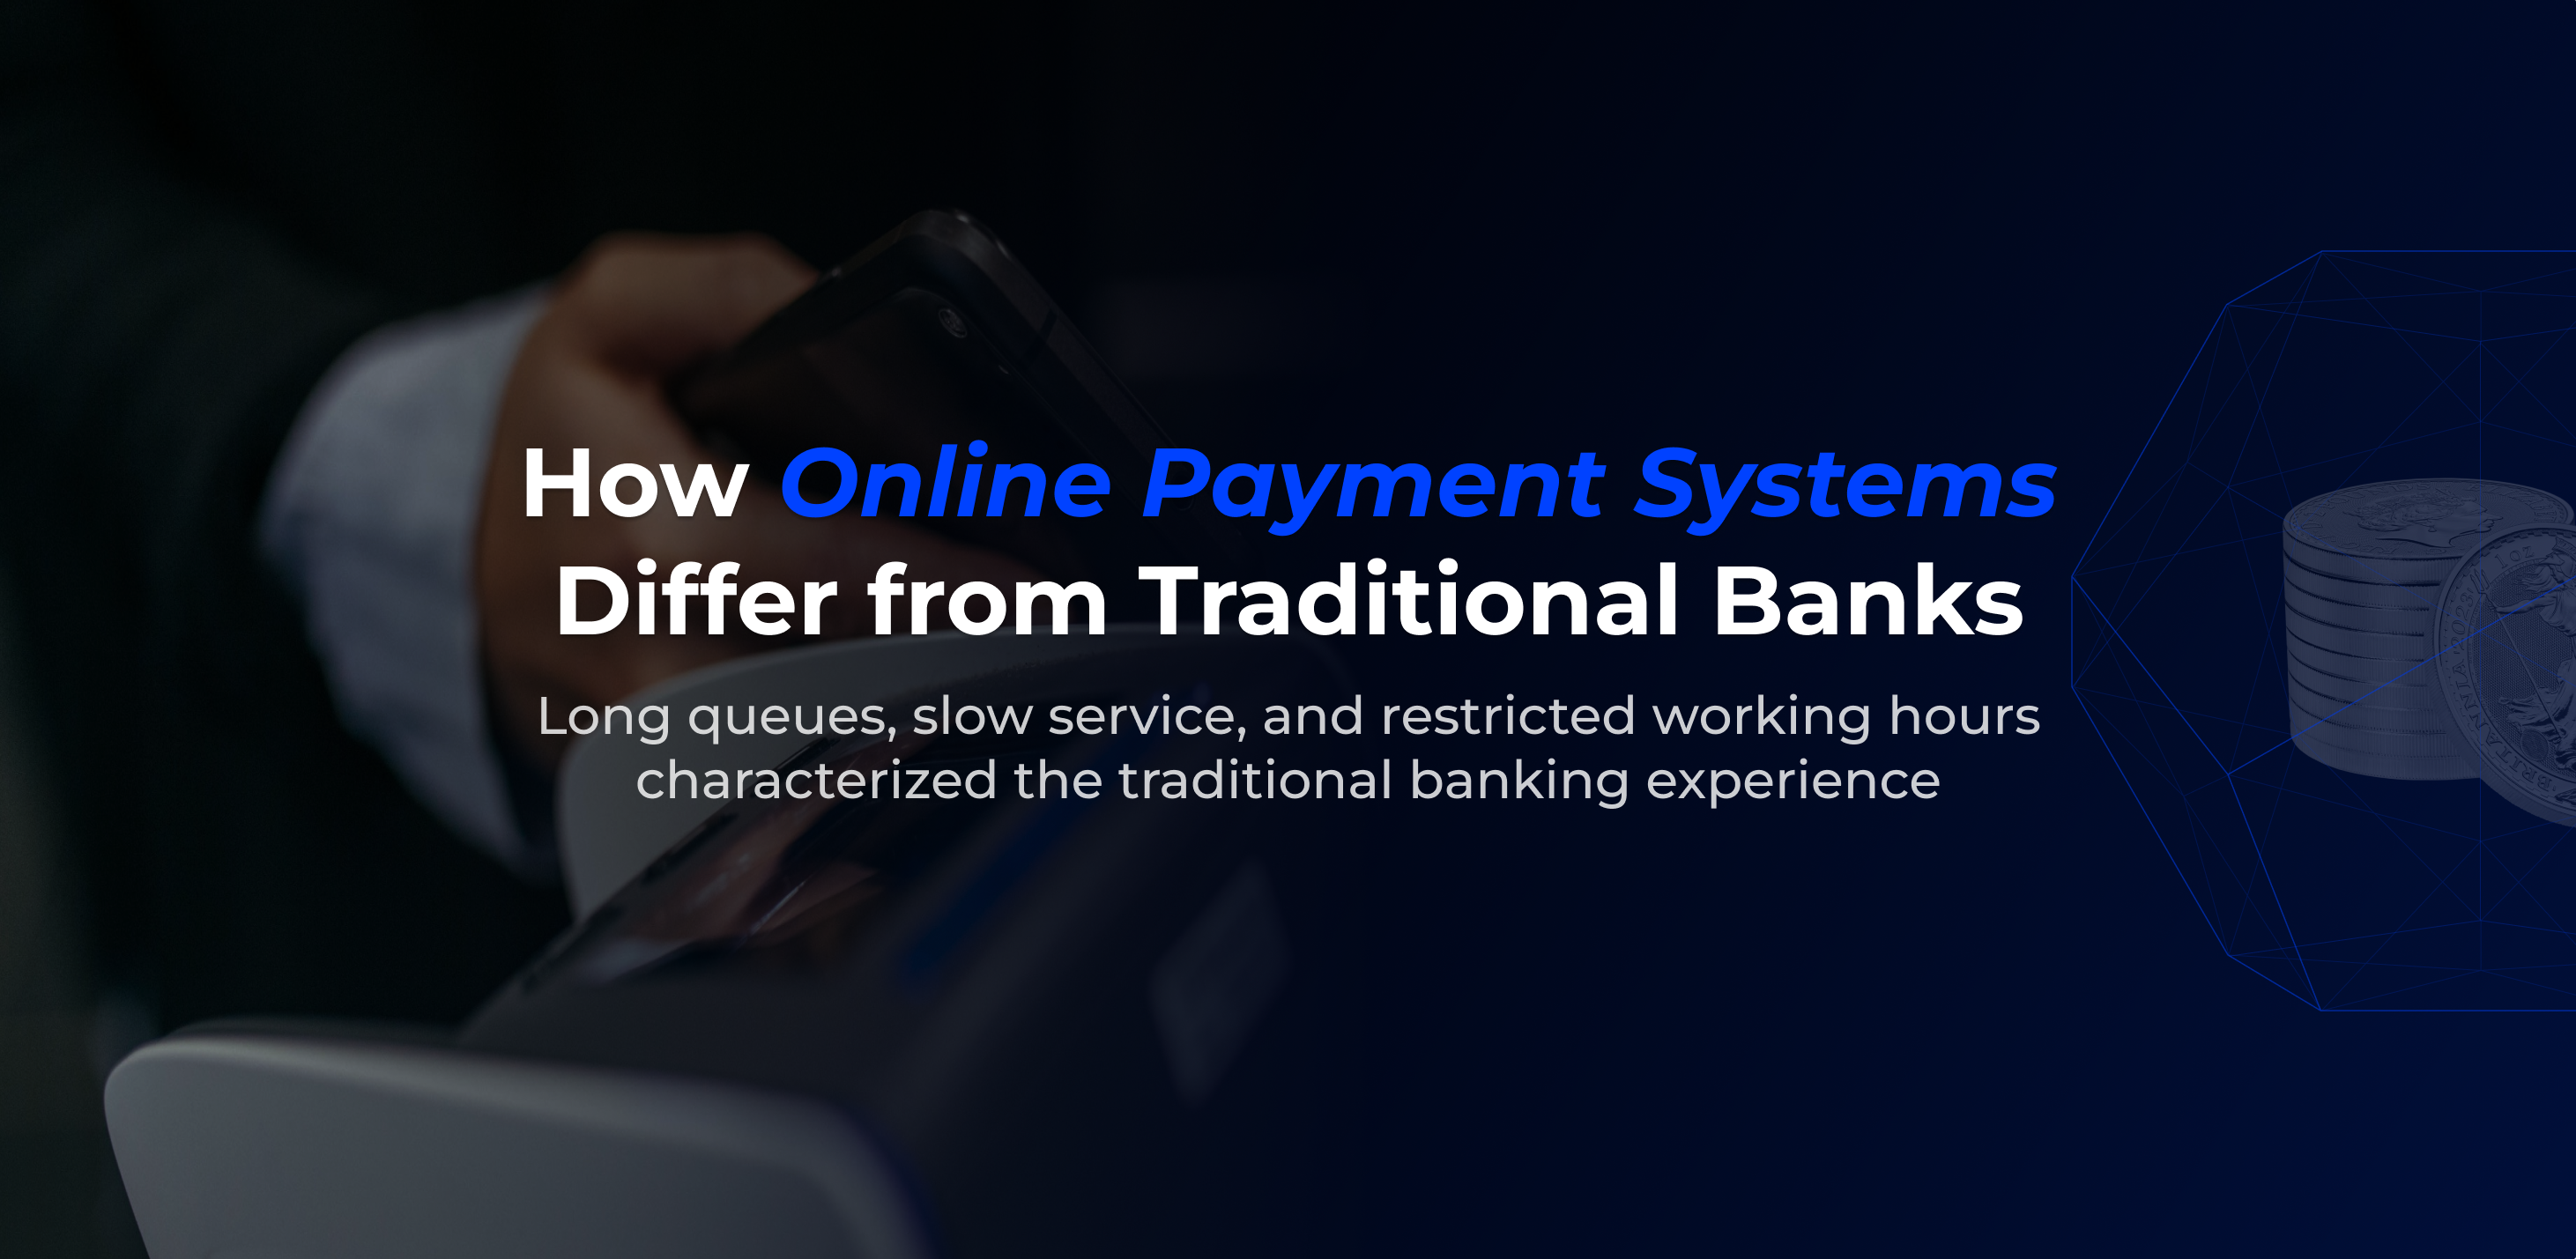 How Online Payment Systems Differ from Traditional Banks